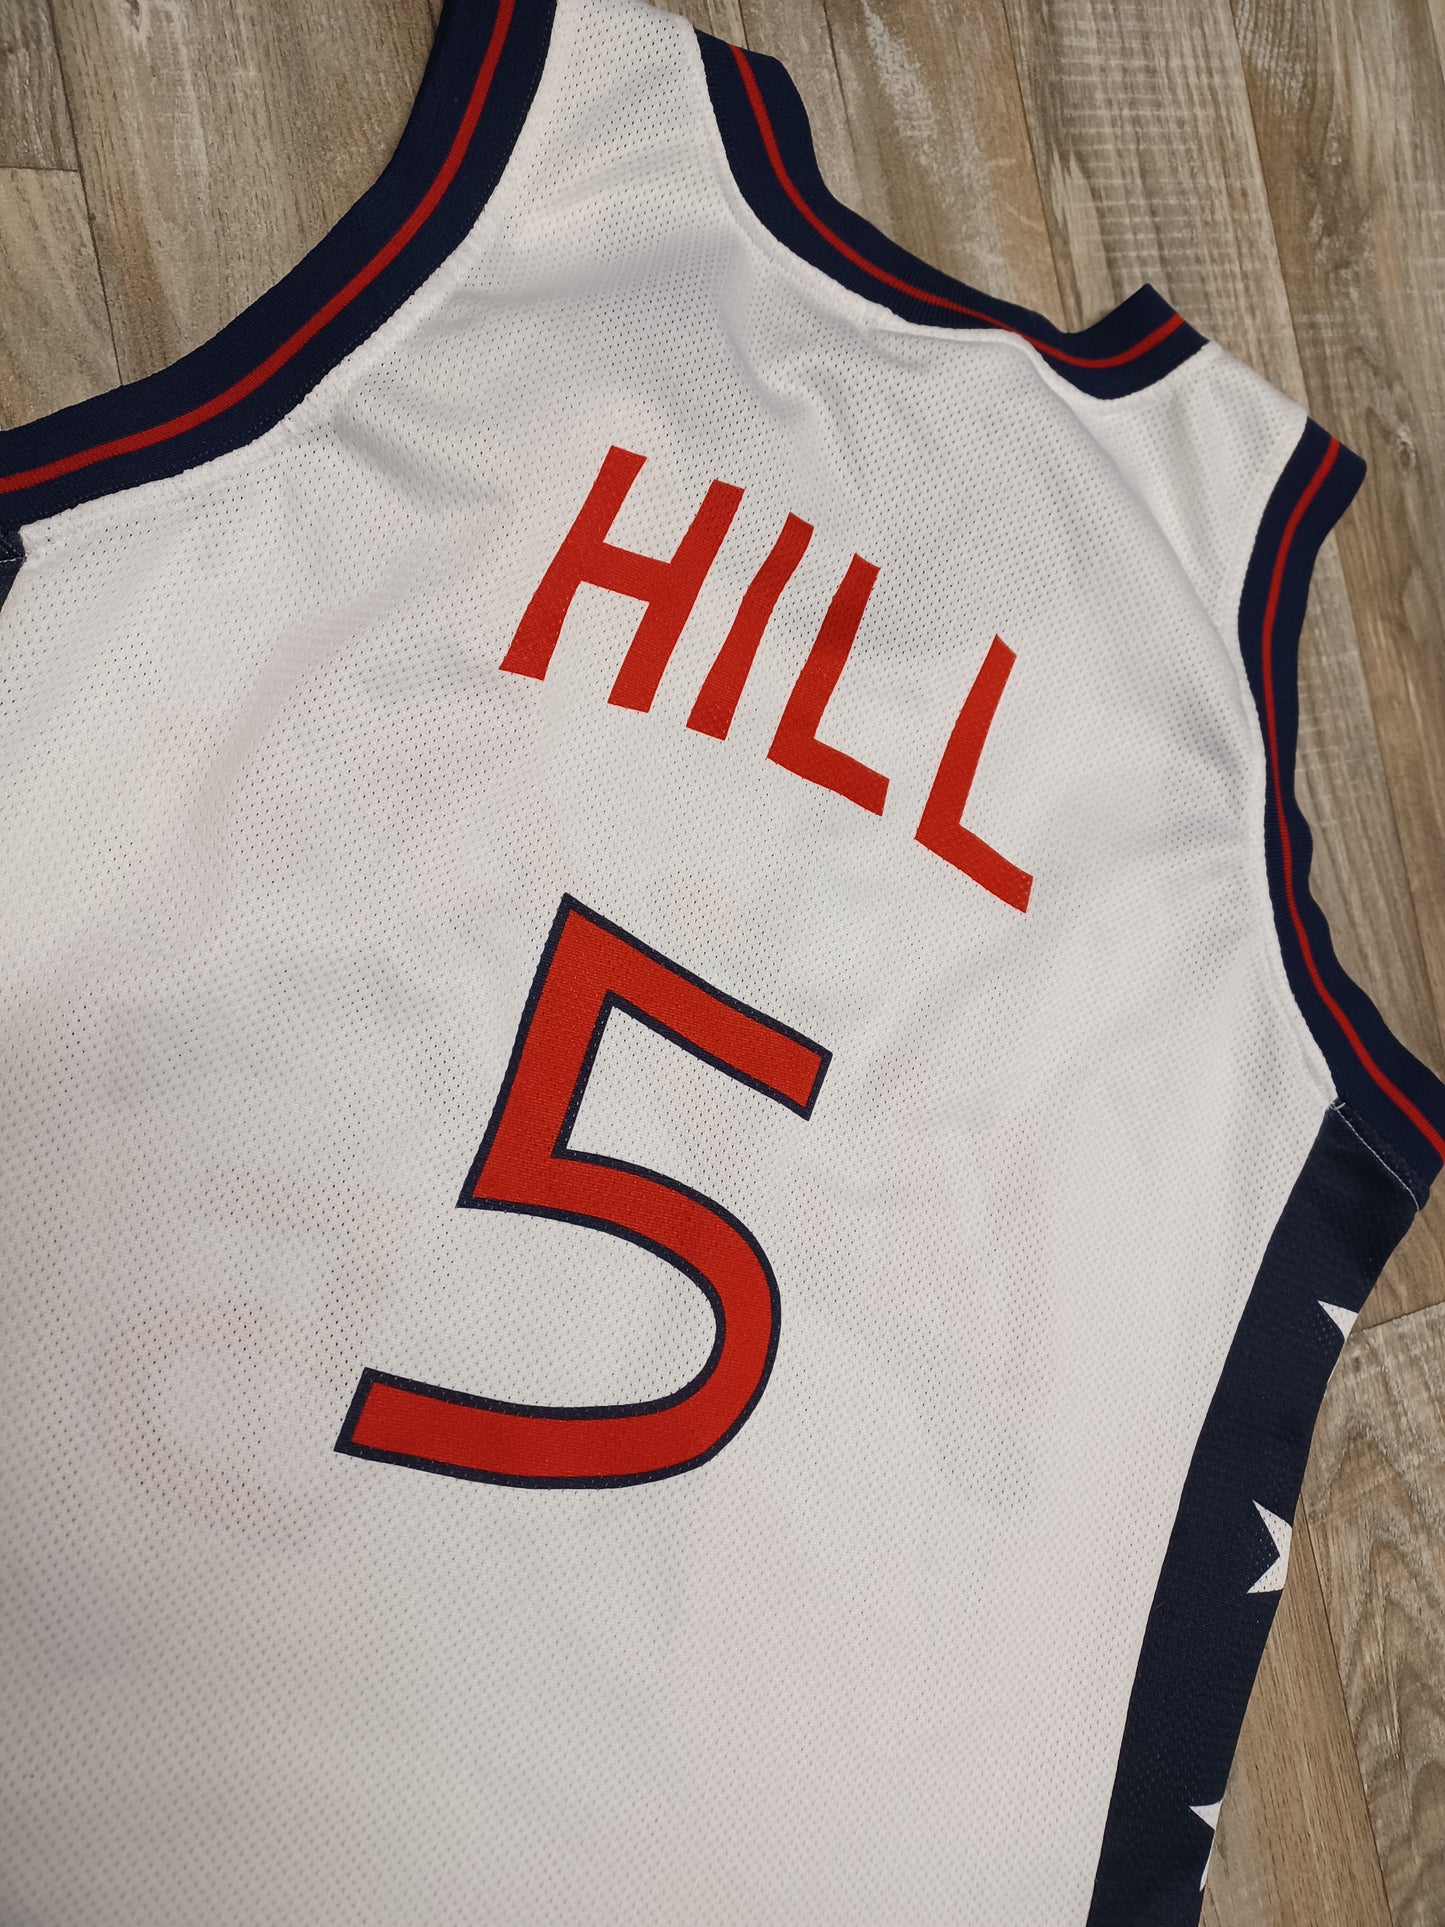 Grant Hill Team USA Jersey Size Small